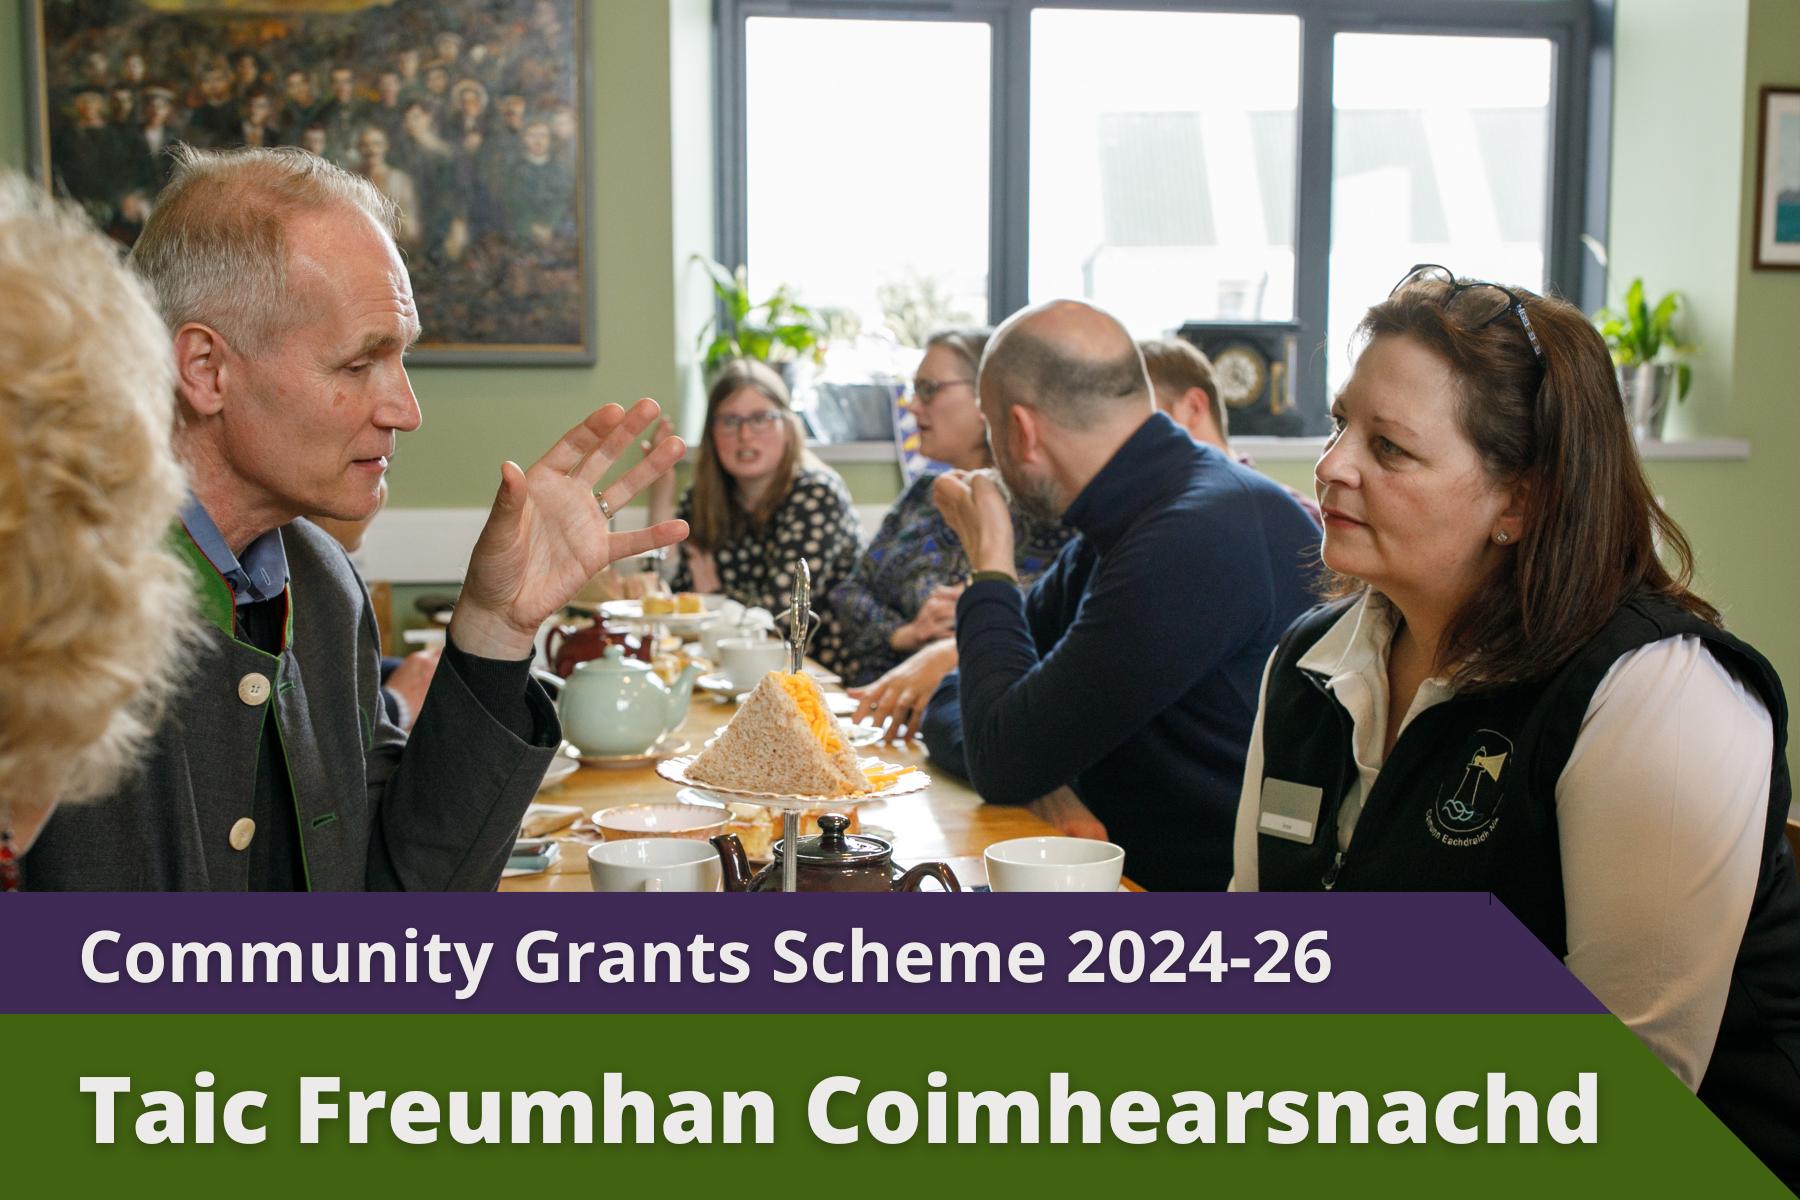 Picture: Afternoon tea with many people sat around table, man and woman talking in foreground with text over picture. Text reads 'Community Grants Scheme 2024-26'